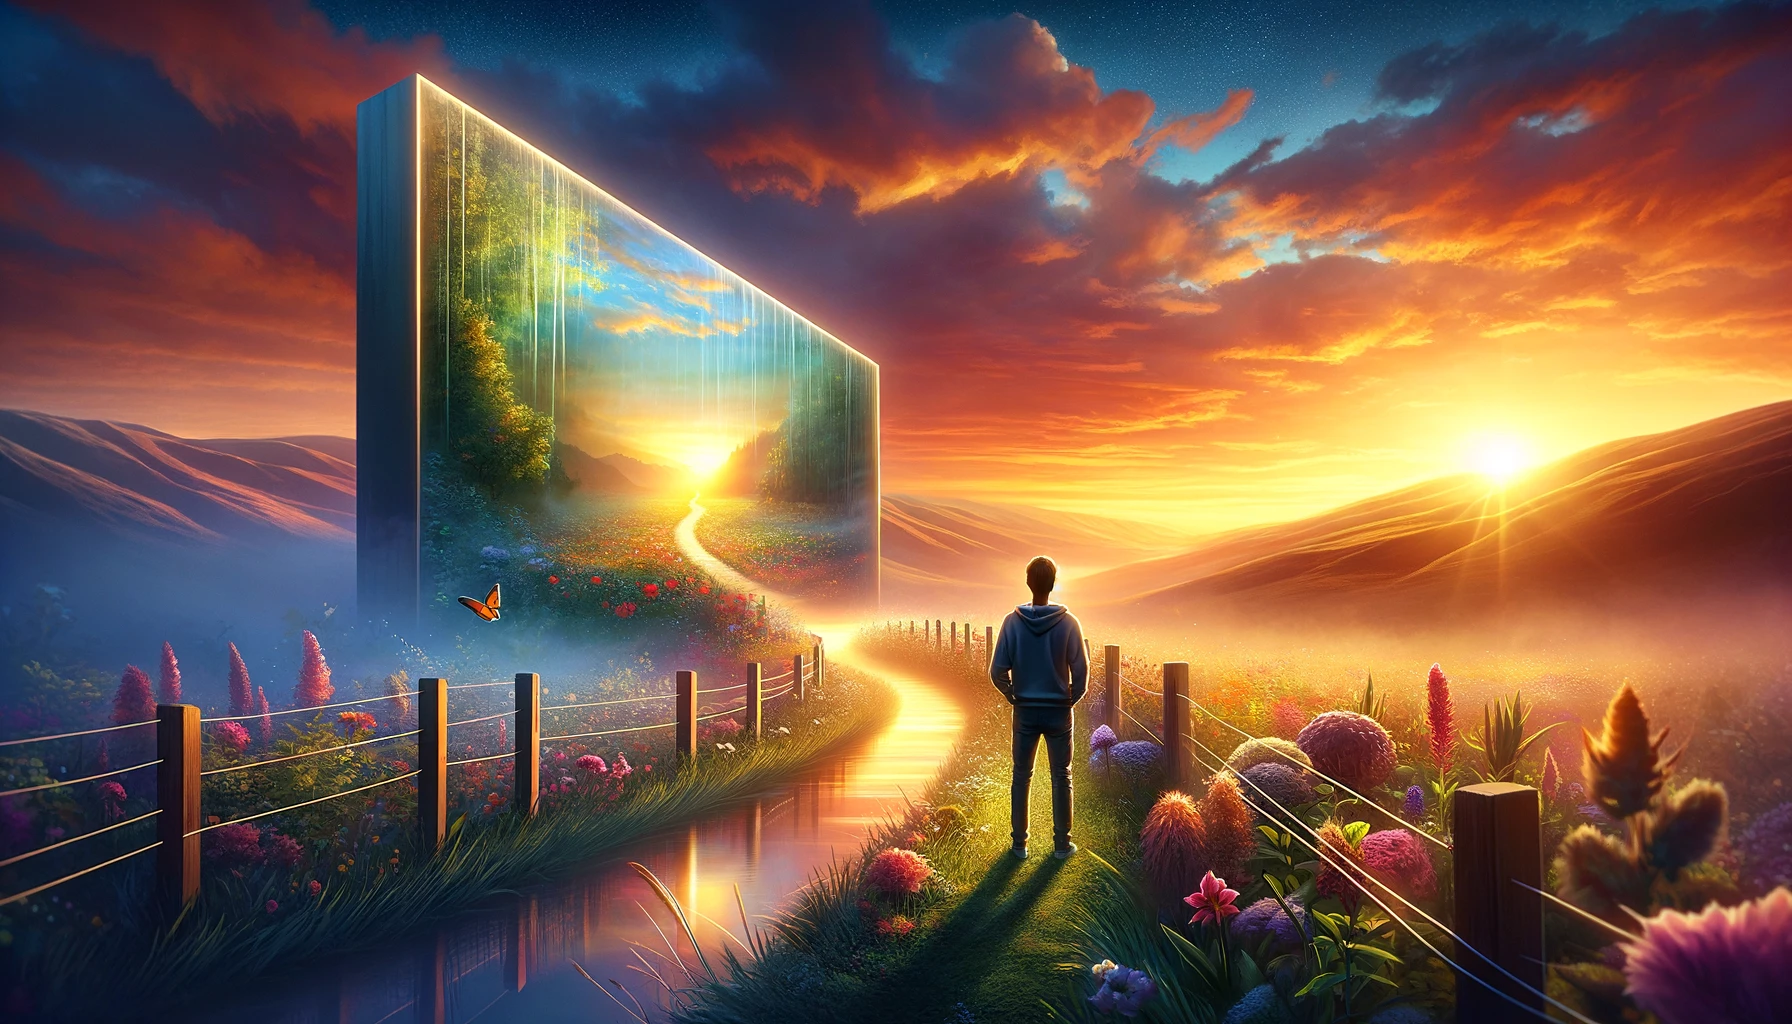 An individual at sunrise faces an invisible wall on their path, contemplating a detour that leads through a vibrant, flower-filled valley around the obstacle, symbolizing the journey to find rewarding new directions in life.